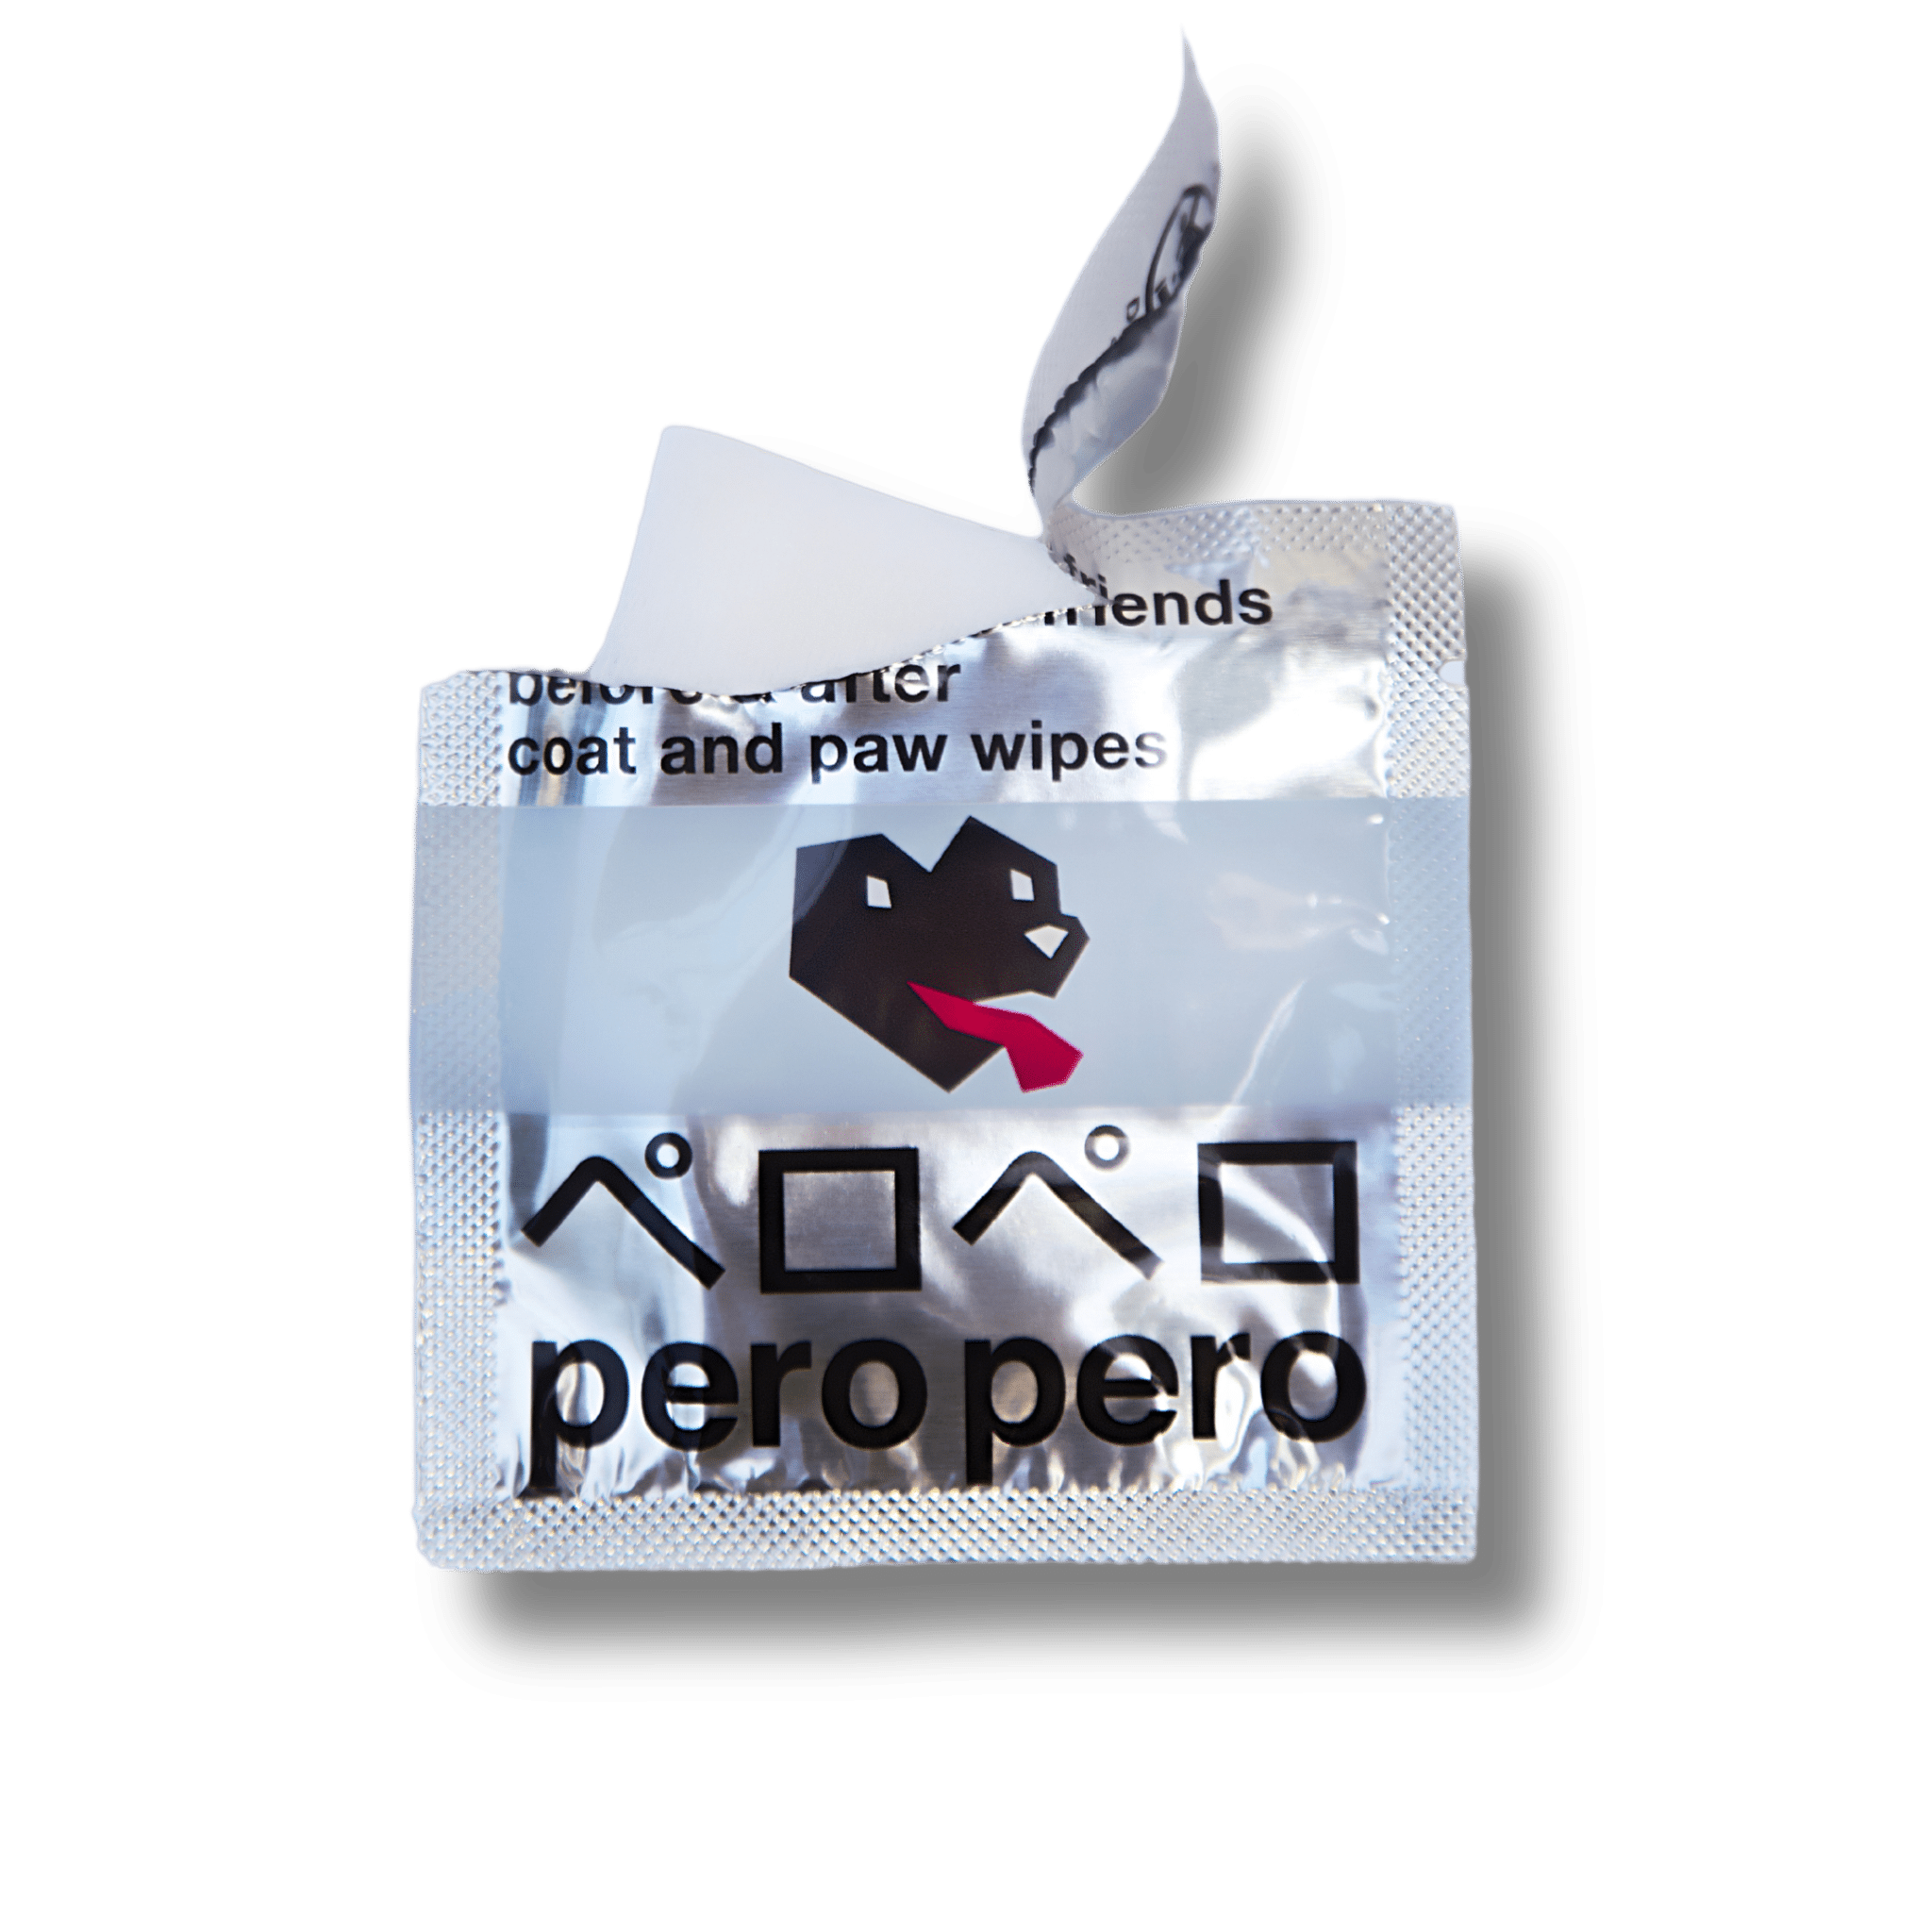 Opened PeroPero Fresh Friends Before & After Coat and Paw Wipes package, showing the wipe partially pulled out